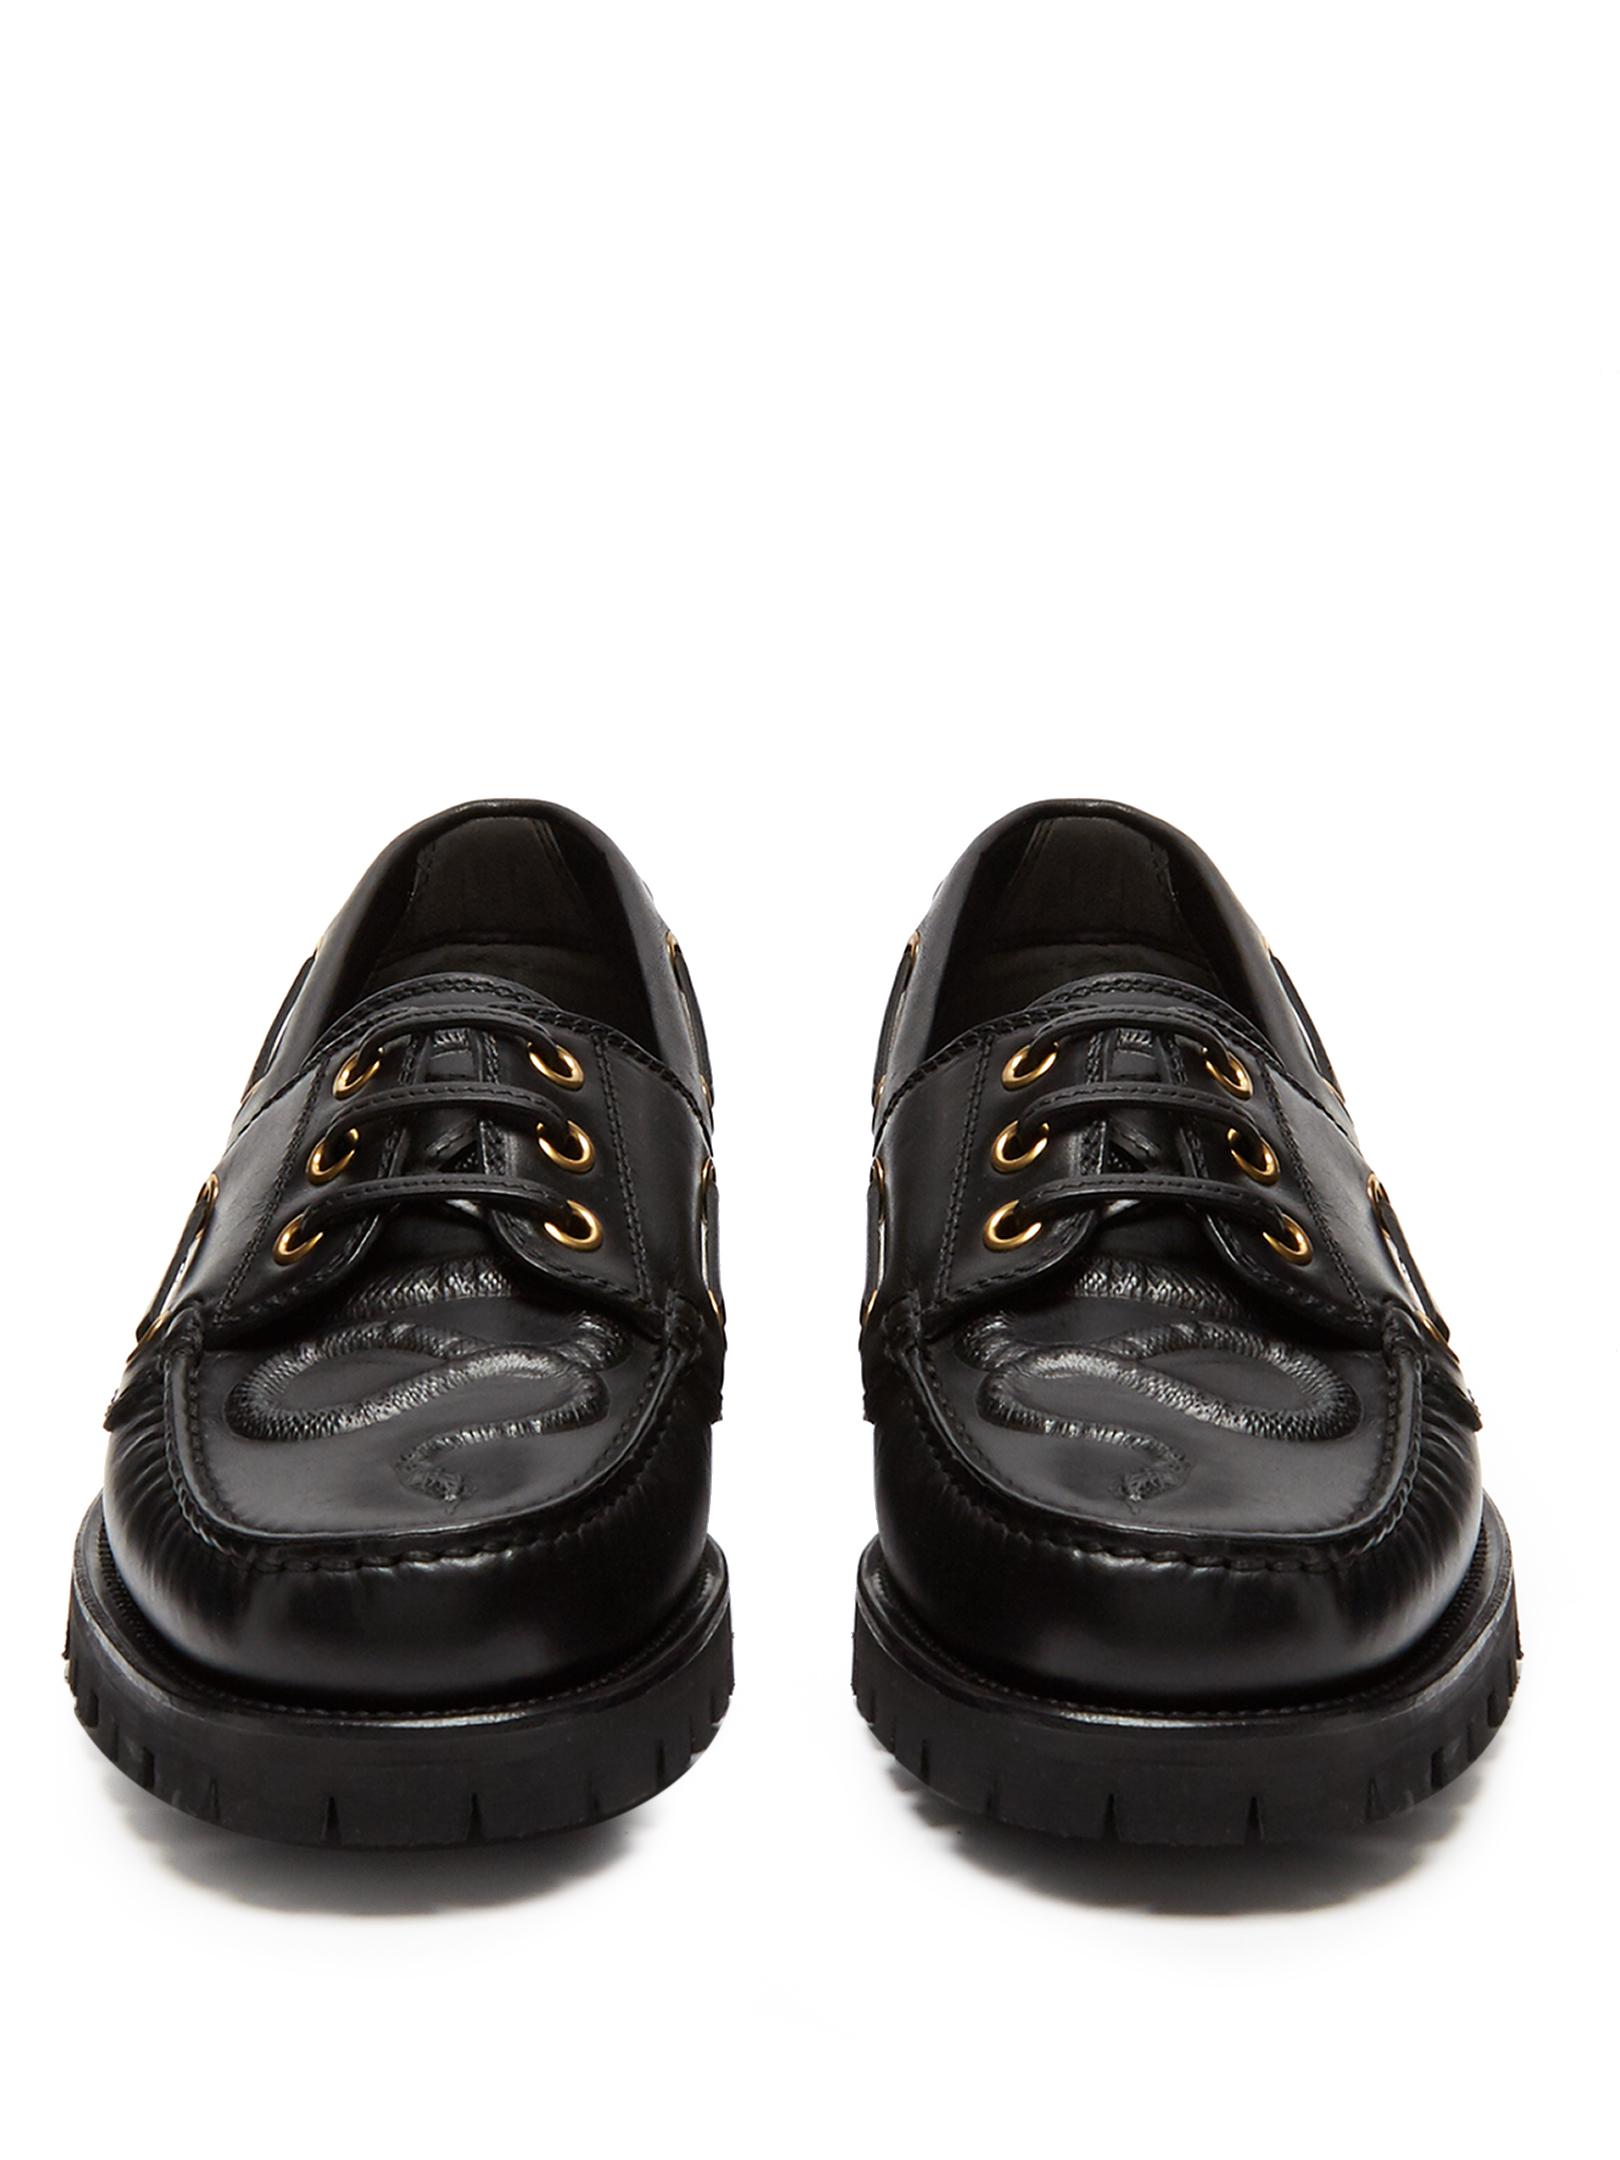 Gucci Pacific Snake-embossed Leather Deck Shoes in Black for Men - Lyst